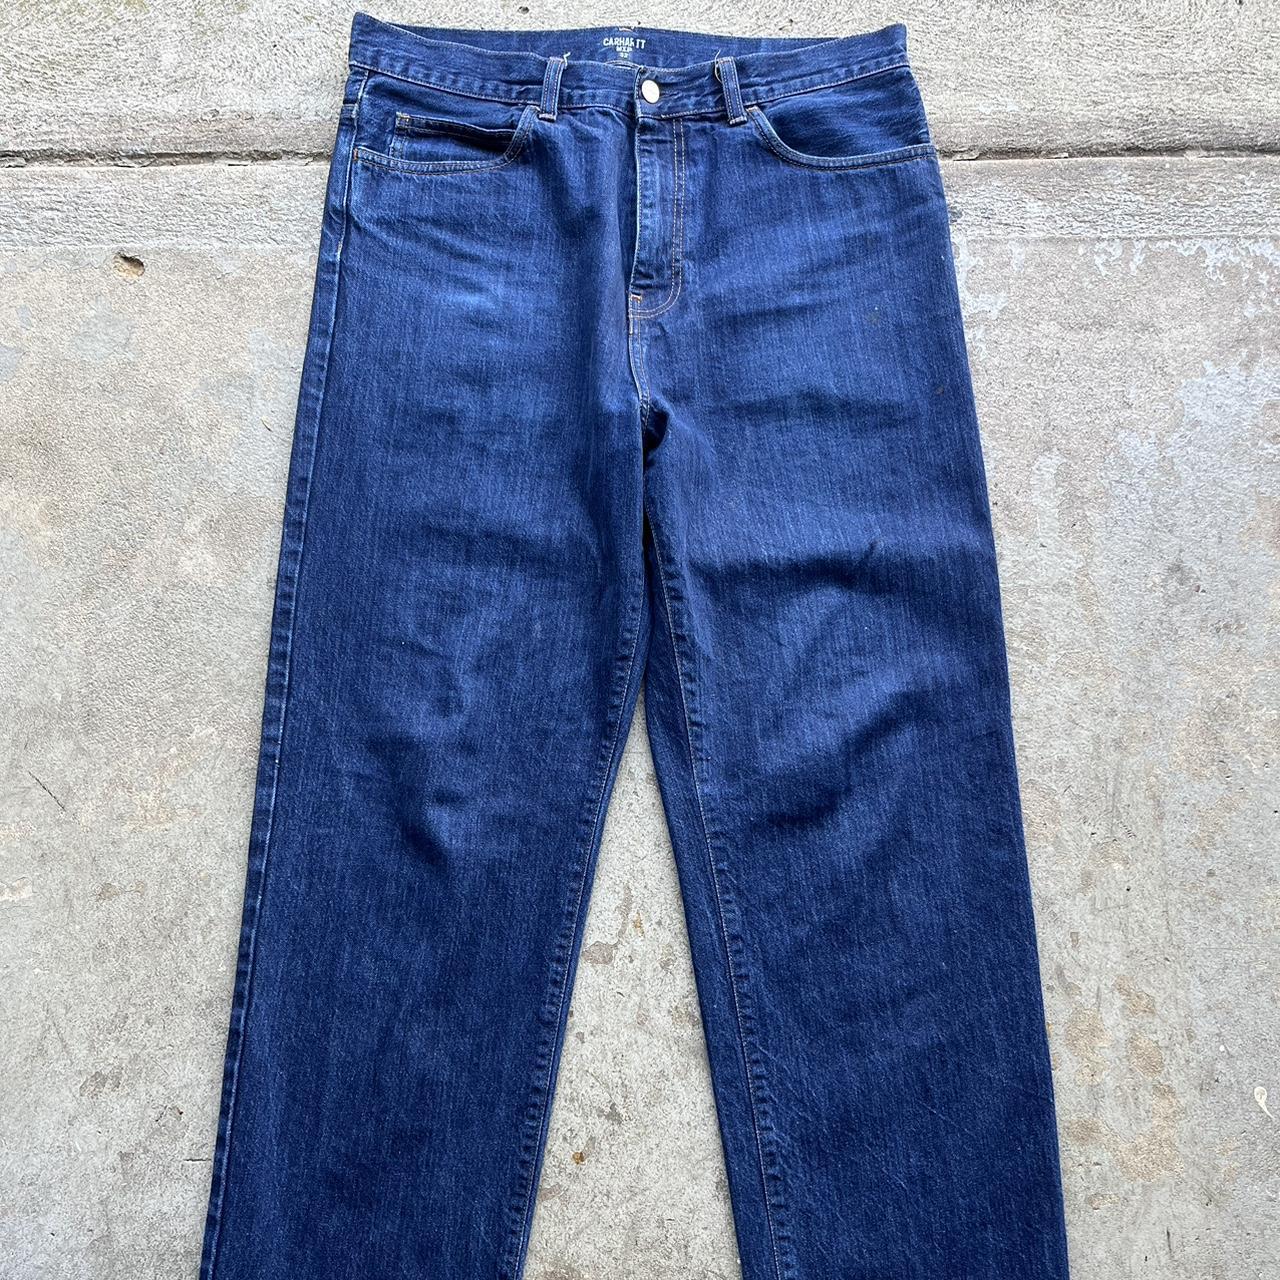 Carhartt jeans 34X32 great condo no flaws #jeans - Depop